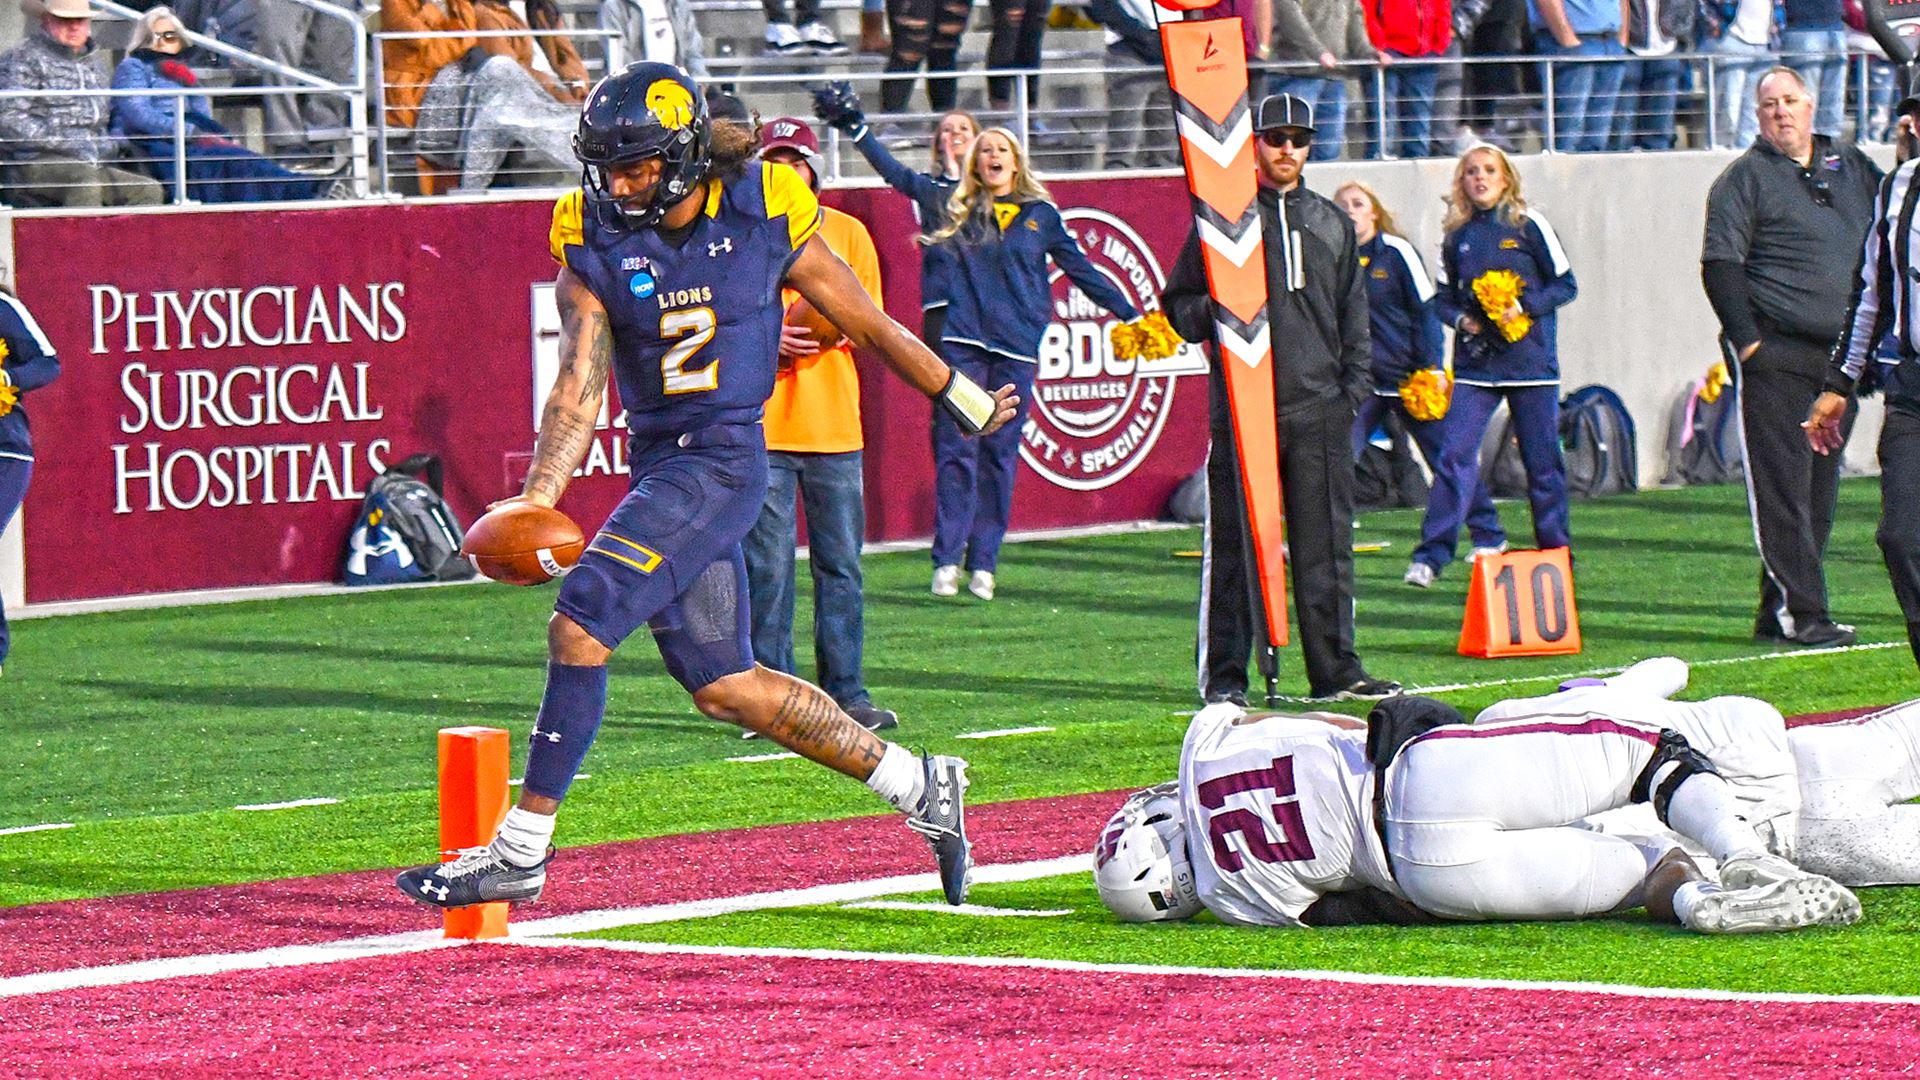 TEXAS A&M-COMMERCE FOOTBALL: Fourth quarter rally leads No. 24 Lions to 34-20 win at West Texas A&M